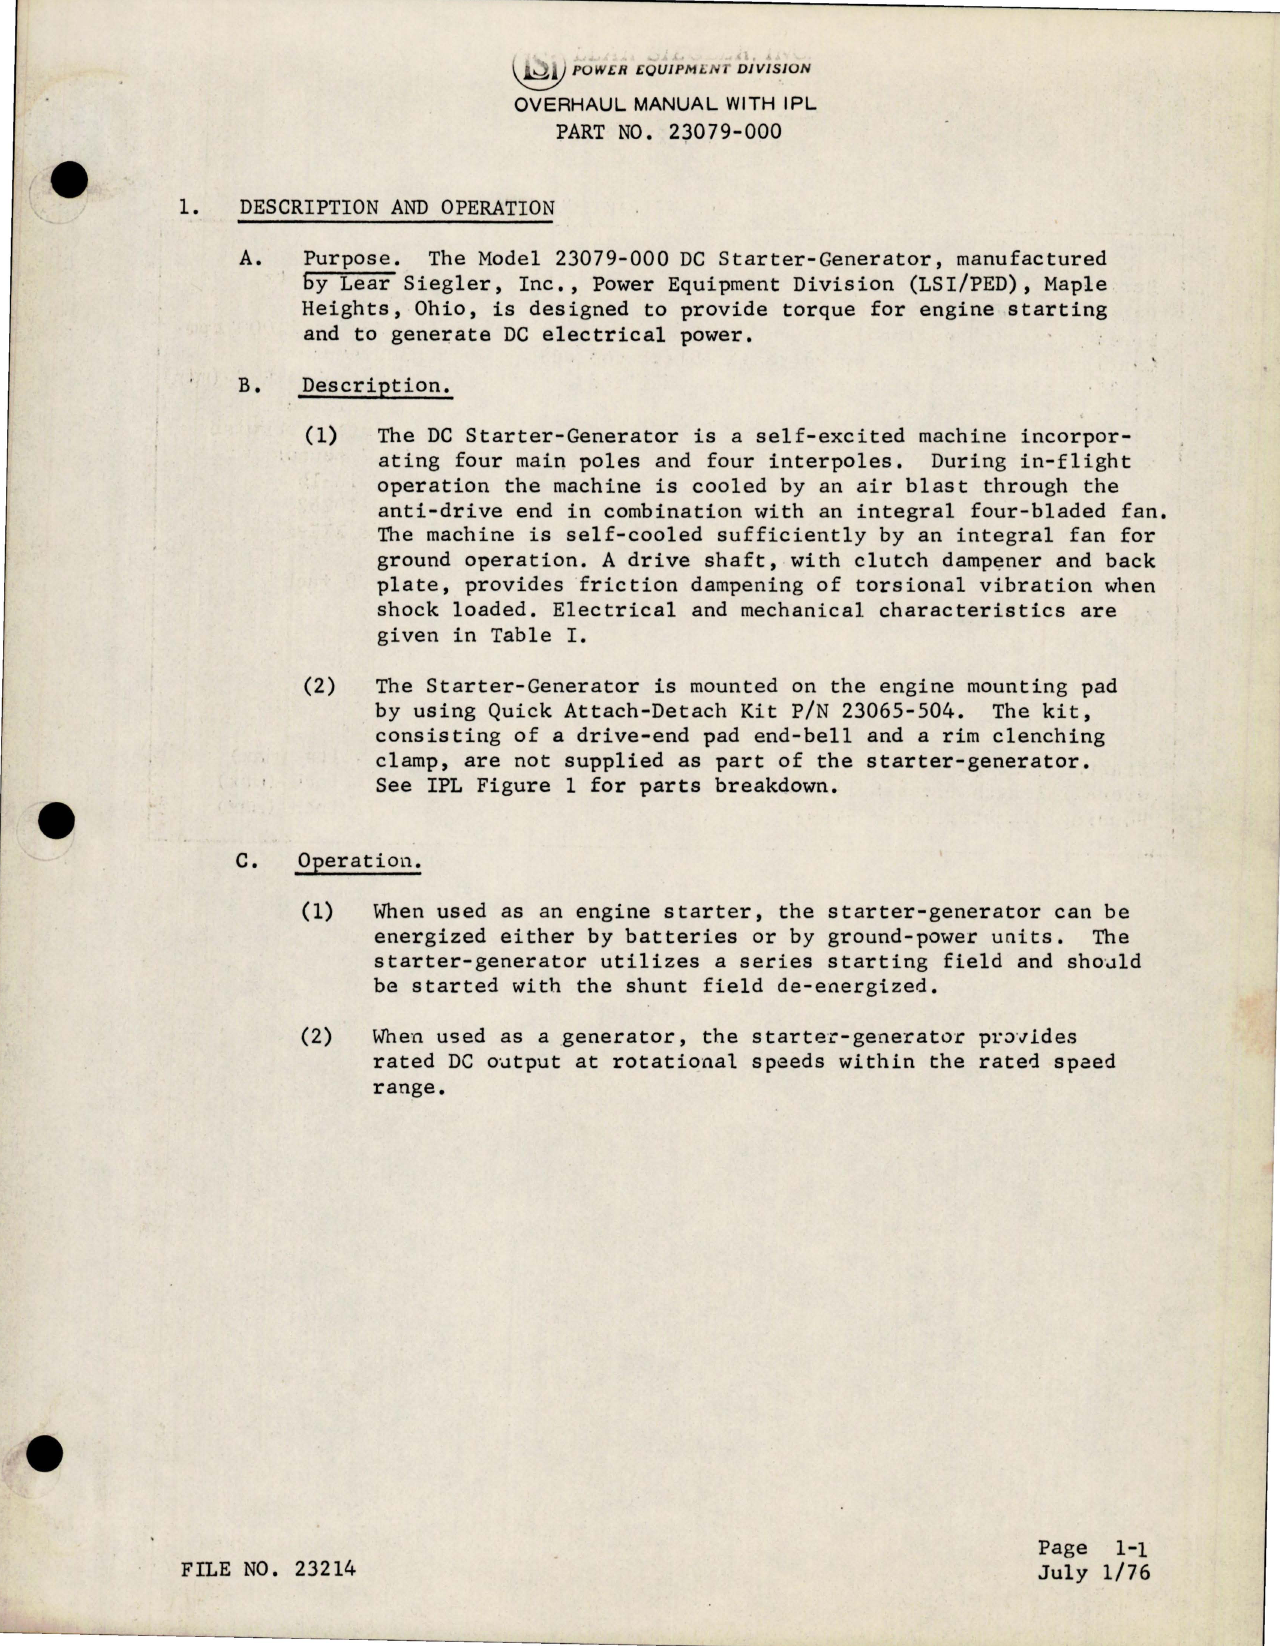 Sample page 5 from AirCorps Library document: Overhaul with Illustrated Parts List for Starter Generator - Model 23079-000 